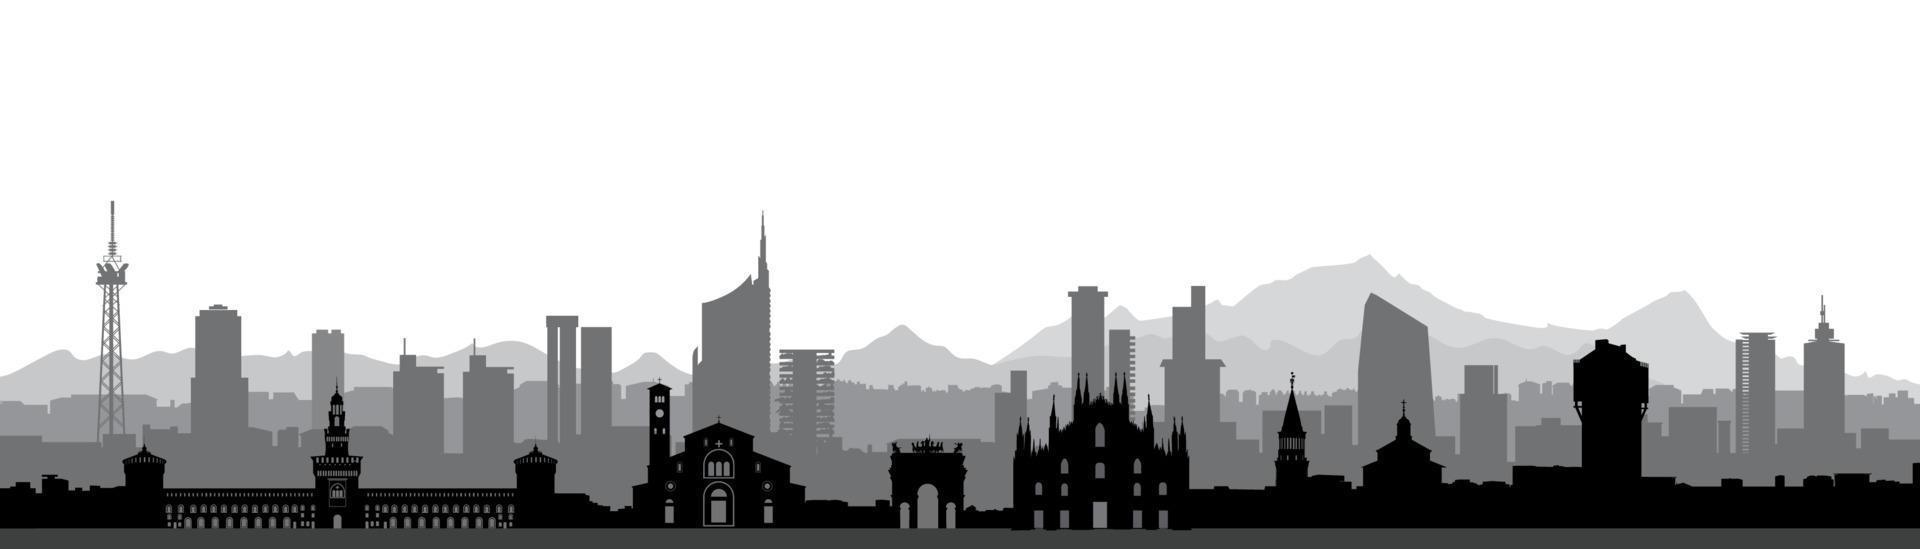 Milan city skyline. Italy, famous architectural tourist landmarks. Travel background with historic buildings. European urban italian landscape. vector